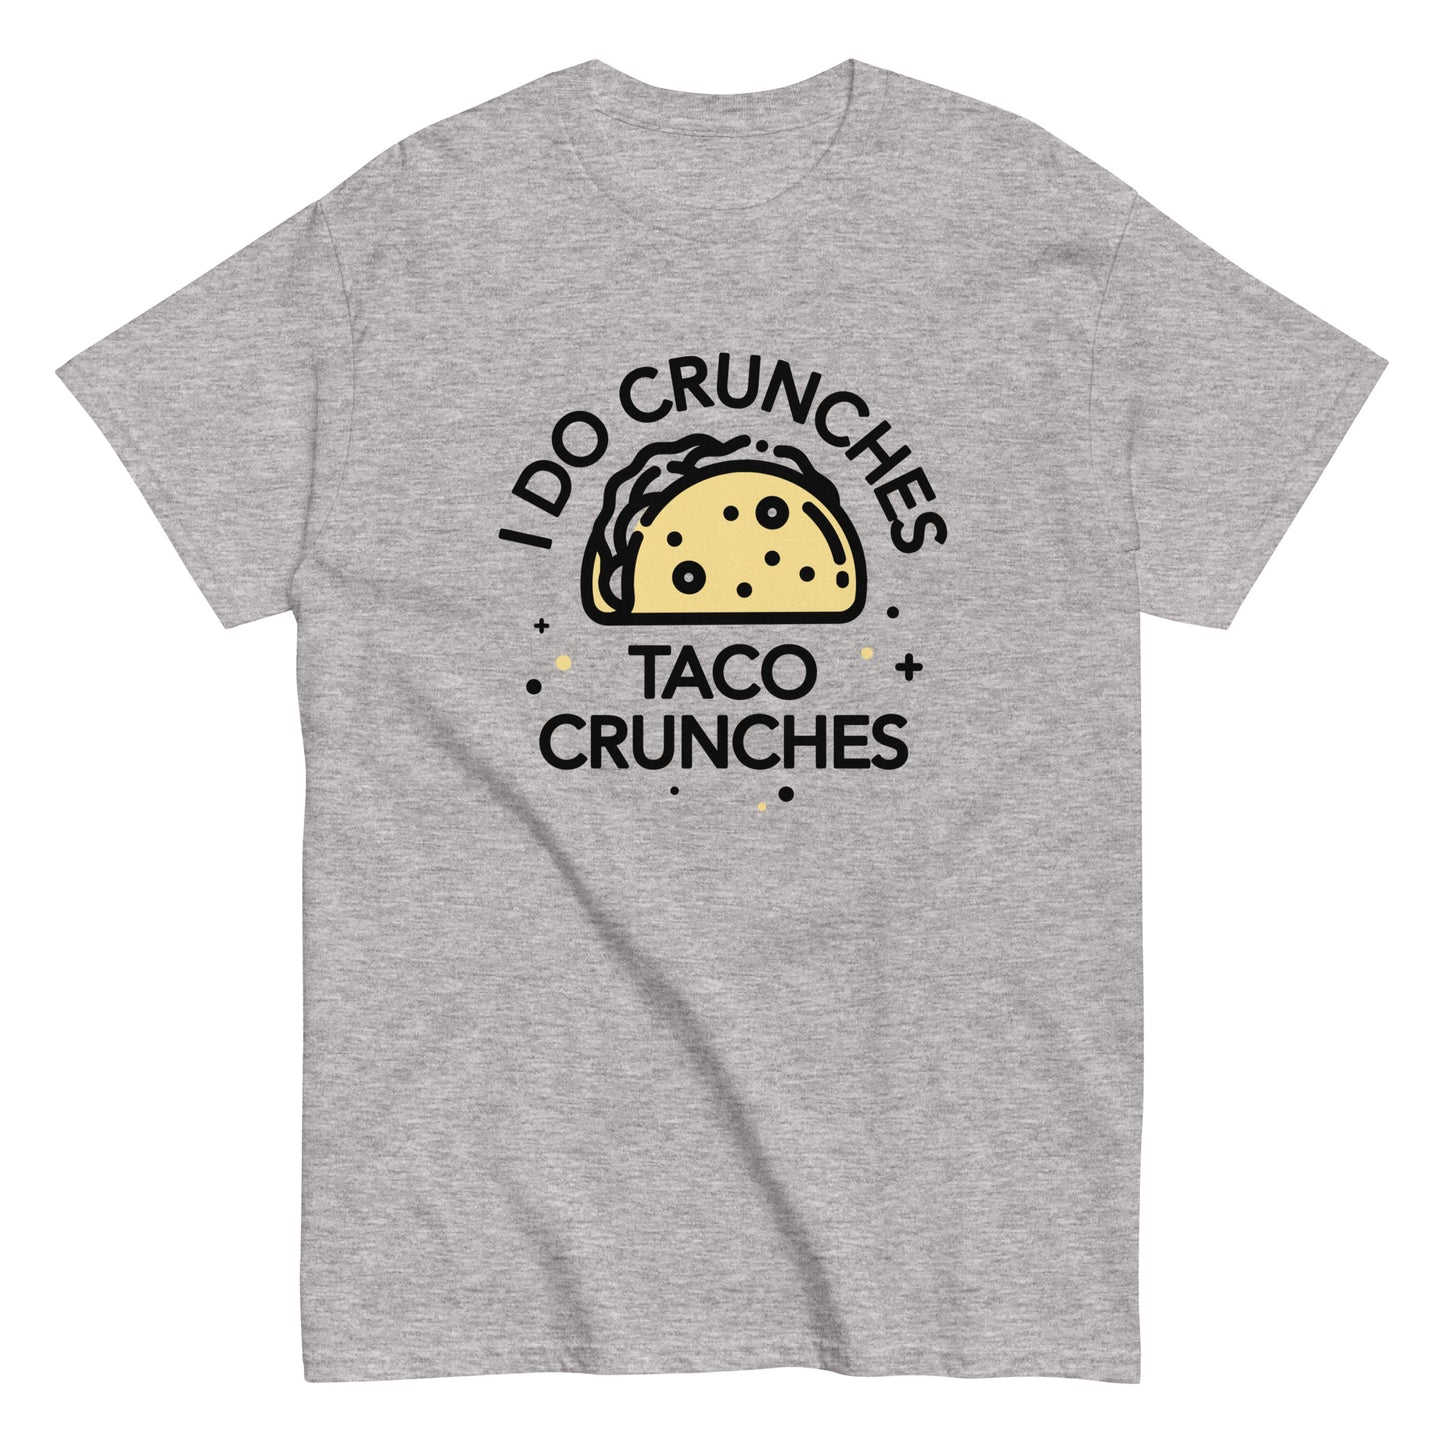 I Do Crunches Taco Crunches Men's Classic Tee